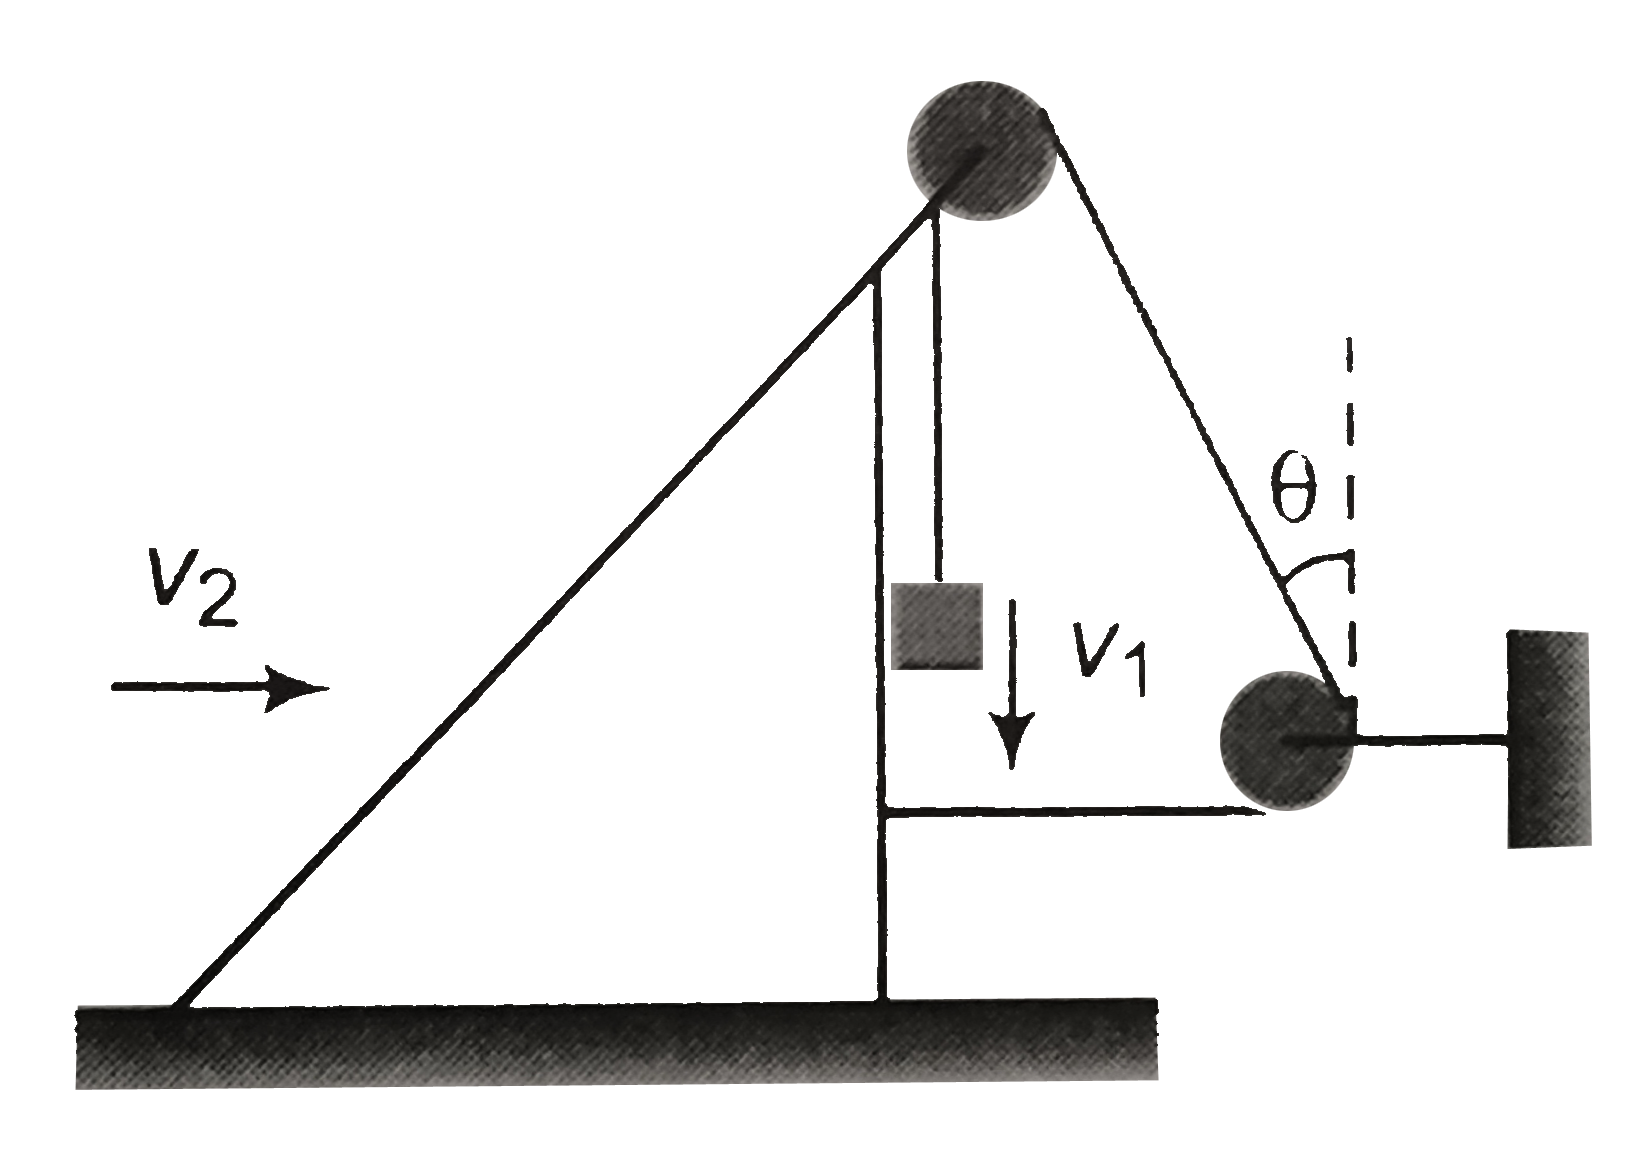 In the figure block moves downwards with velocity v(1), the wedge rightwards with velocity v(2). The correct relation between v(1) and v(2) is